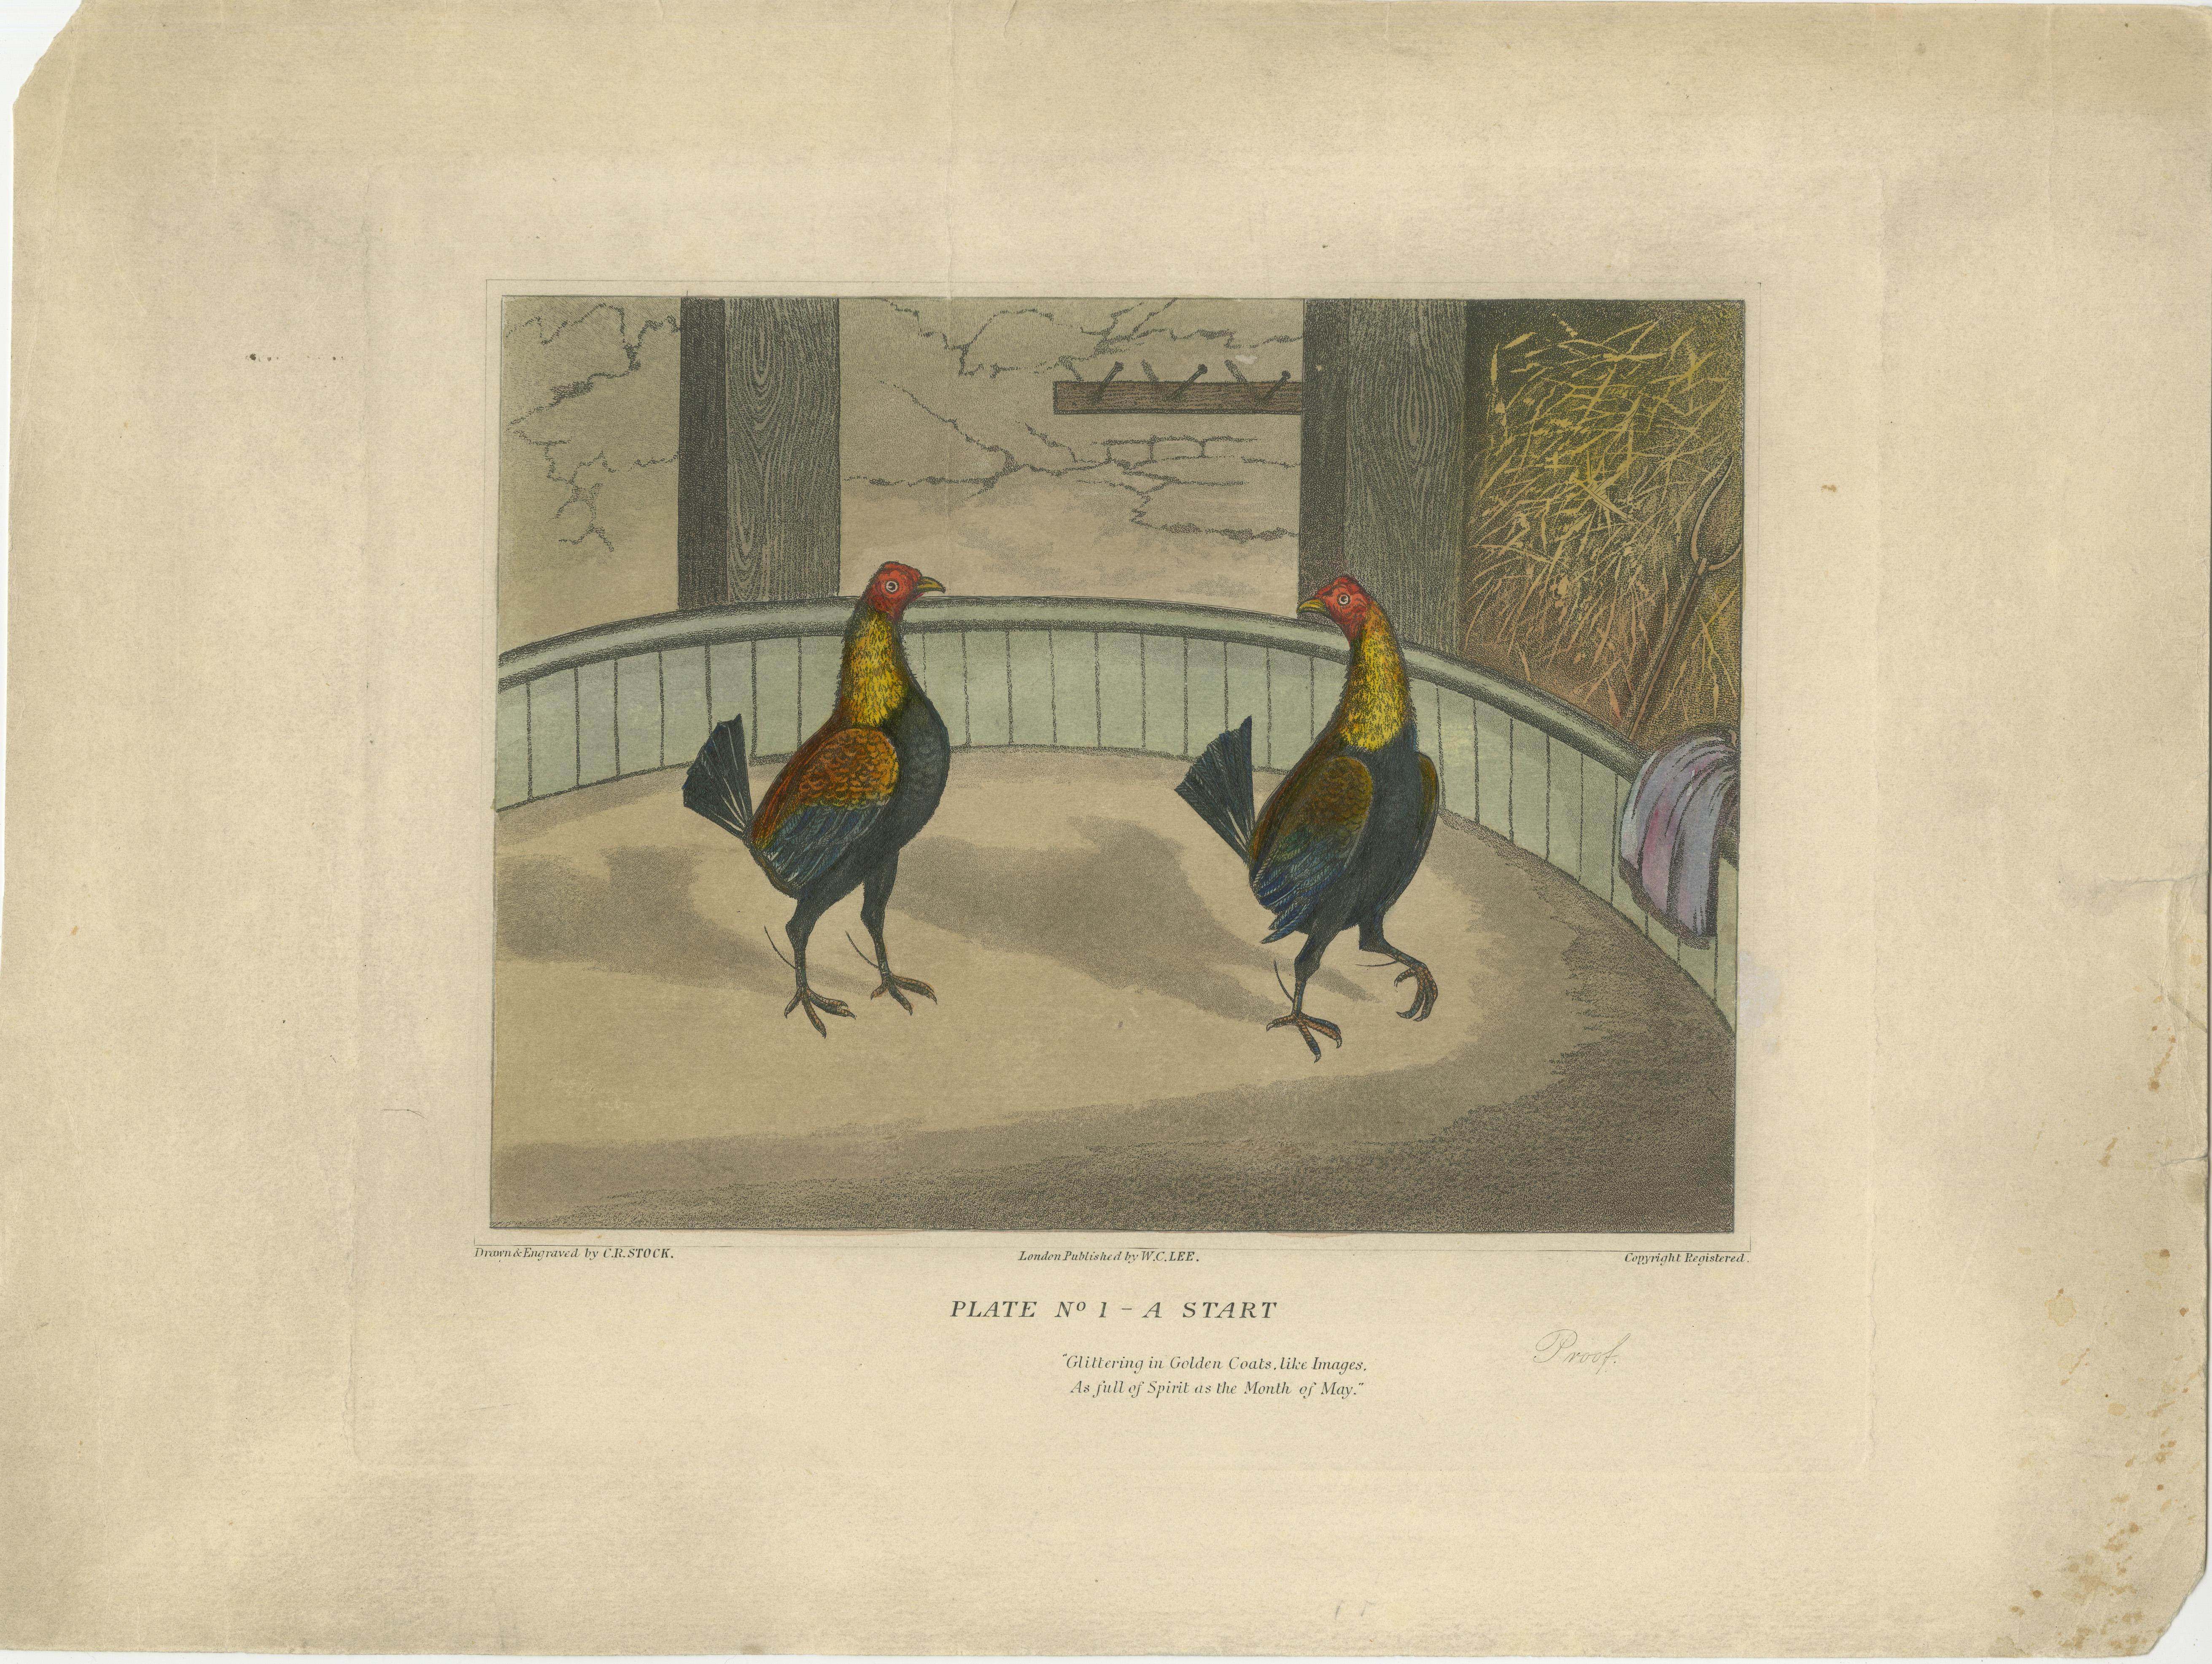 A complete series of six old aquatint etchings created by C. R. Stock after S. H. Alken, published around 1830 in London by W. C. Lee. 

C.R. Stock, a British artist from the 19th century, was known for creating aquatint engravings. He produced a